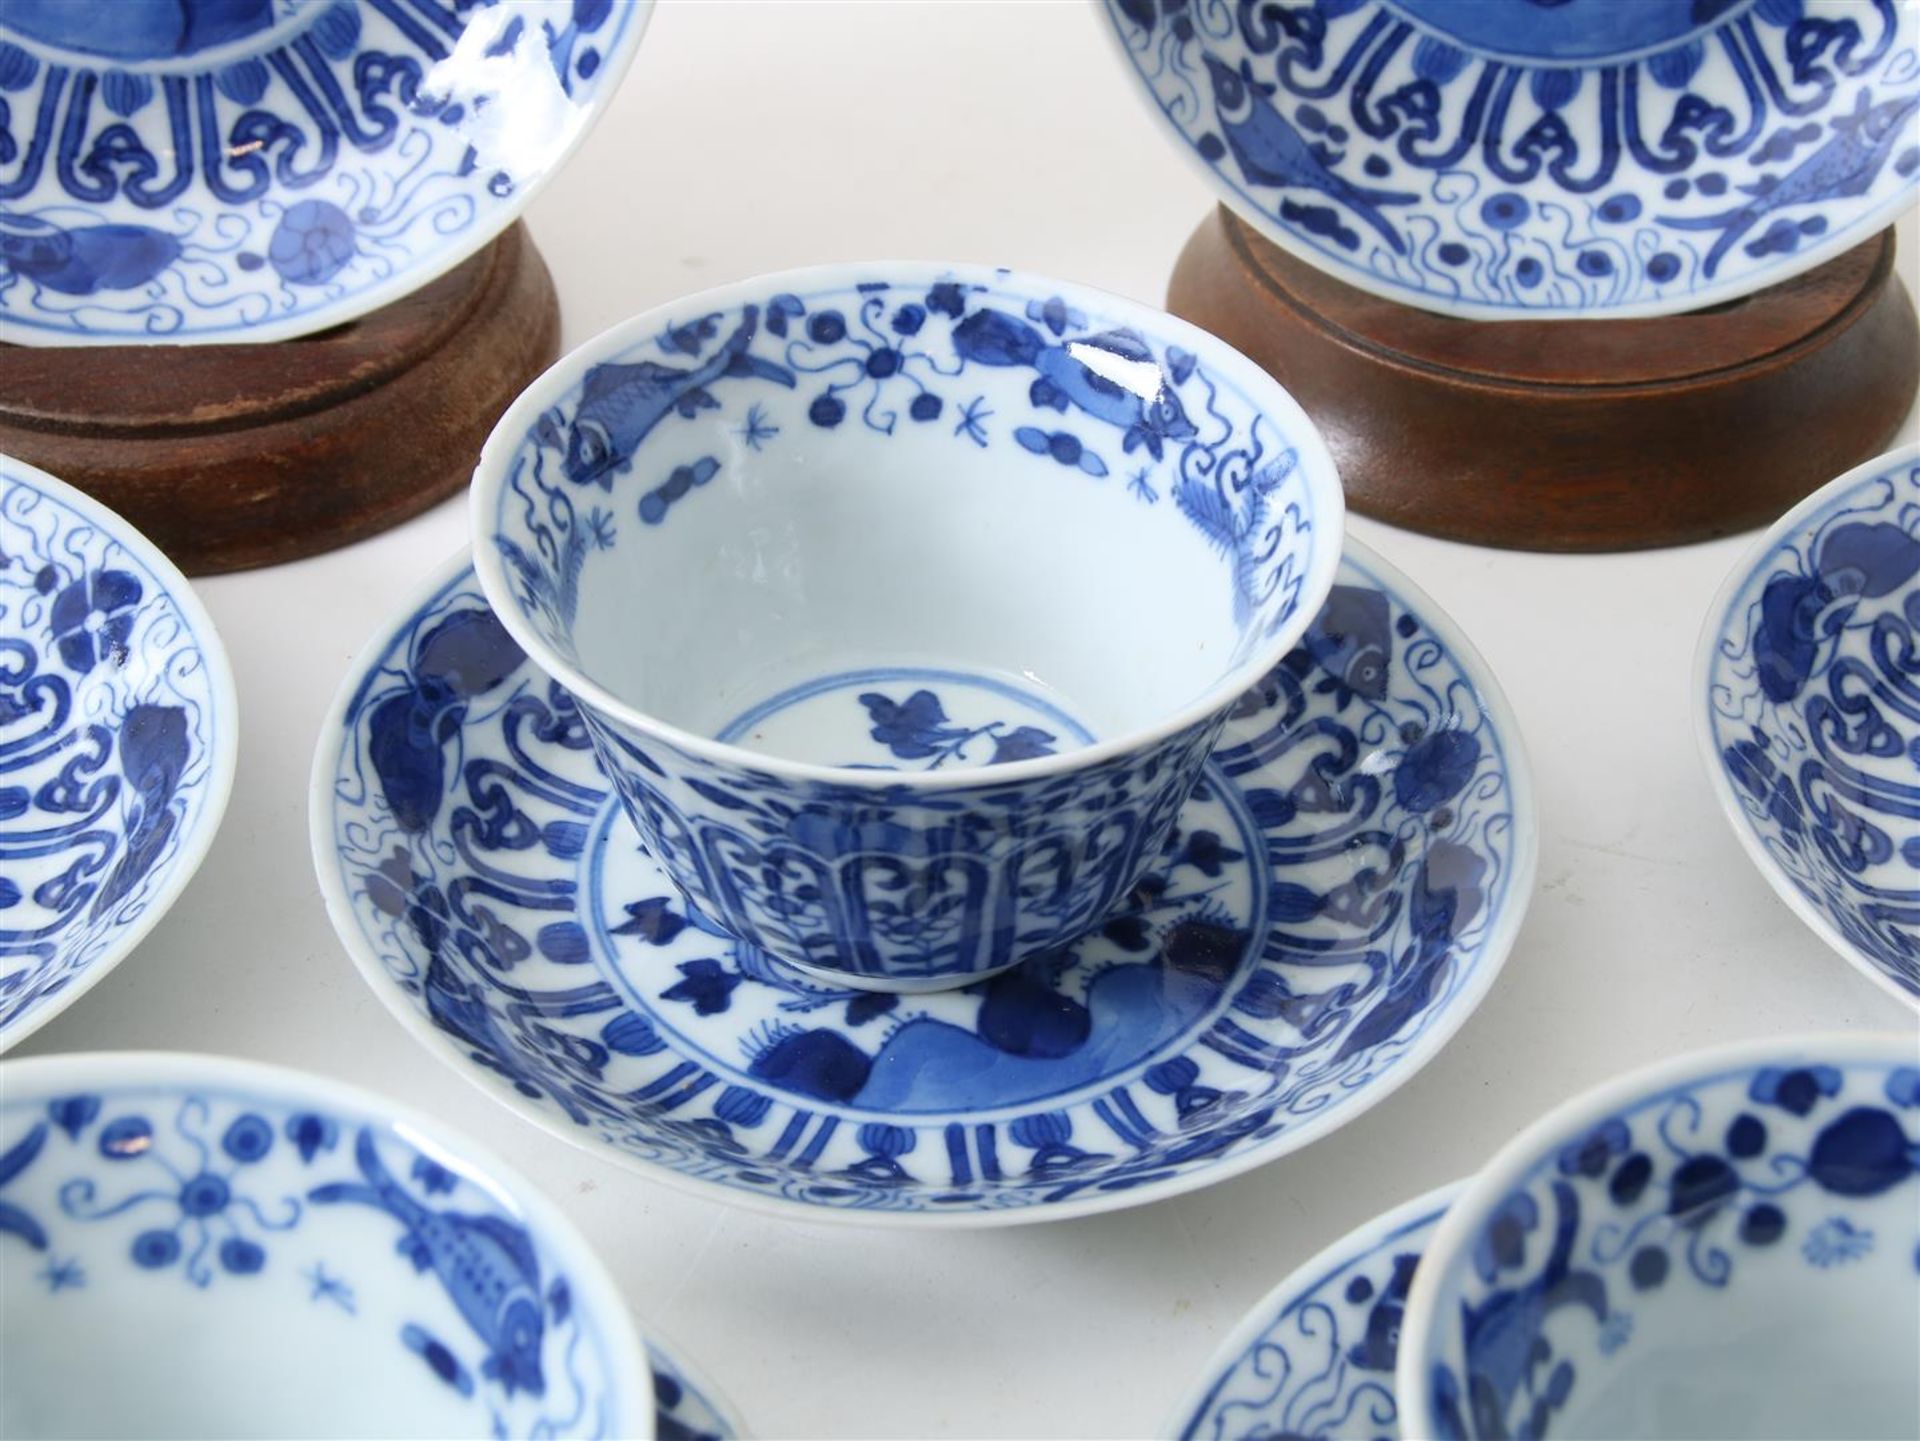 Lot of 12 porcelain cups and 11 saucers decorated in blue with perch and butterfly decor, China - Image 11 of 19